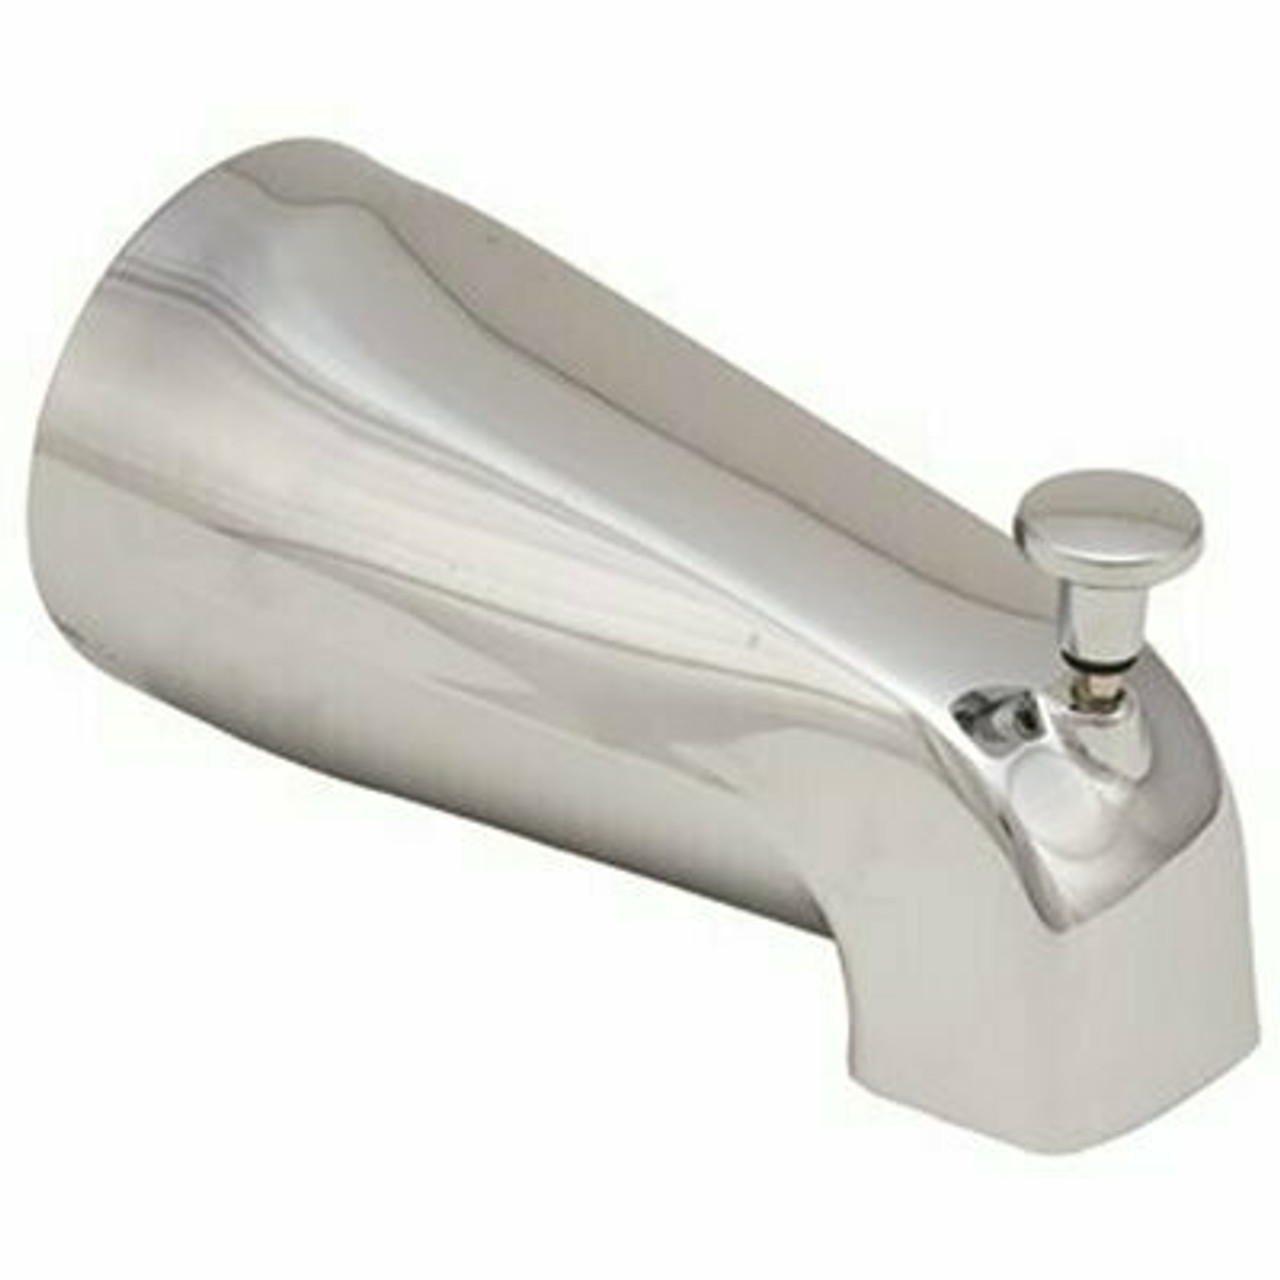 Proplus 3/4 In. Or 1/2 In. Fip Bathtub Spout With Front Diverter, Chrome